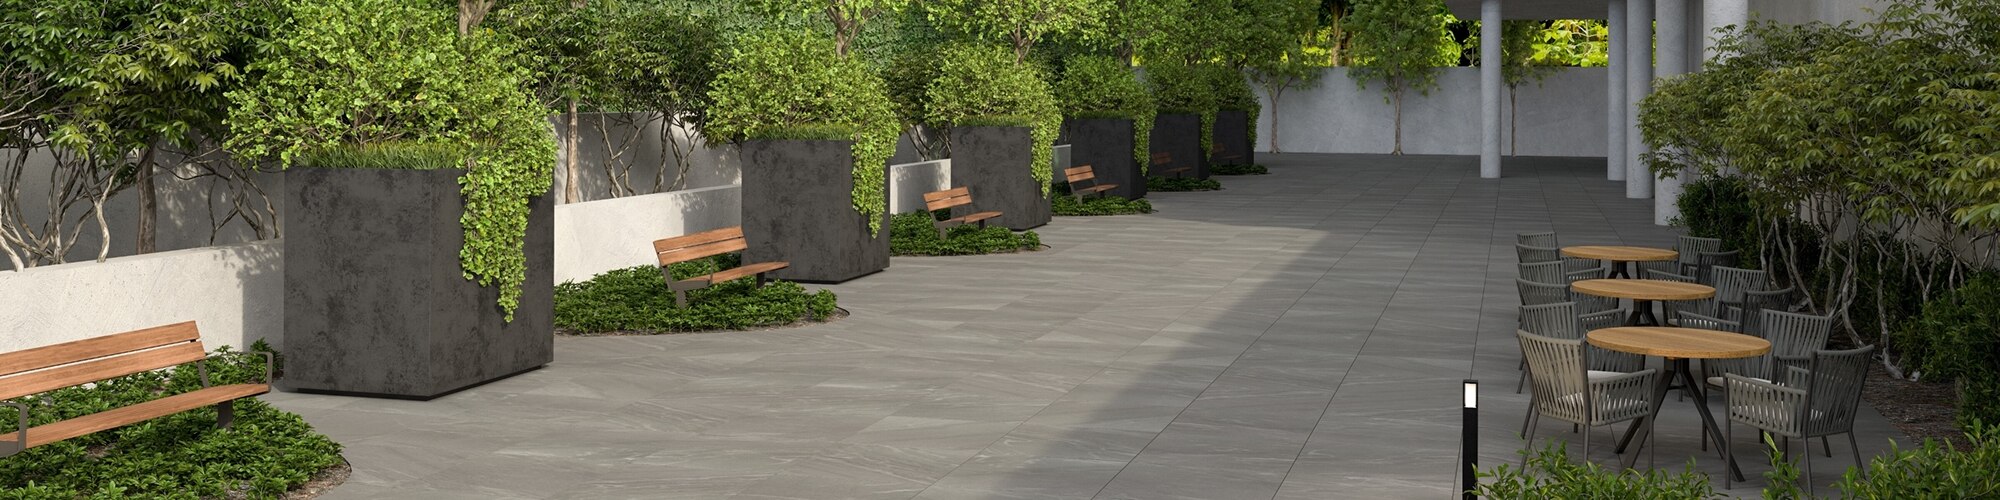 Office building courtyard with gray porcelain pavers that look like stone, dining table & chairs, wooden benches and large planters along white retaining wall. 